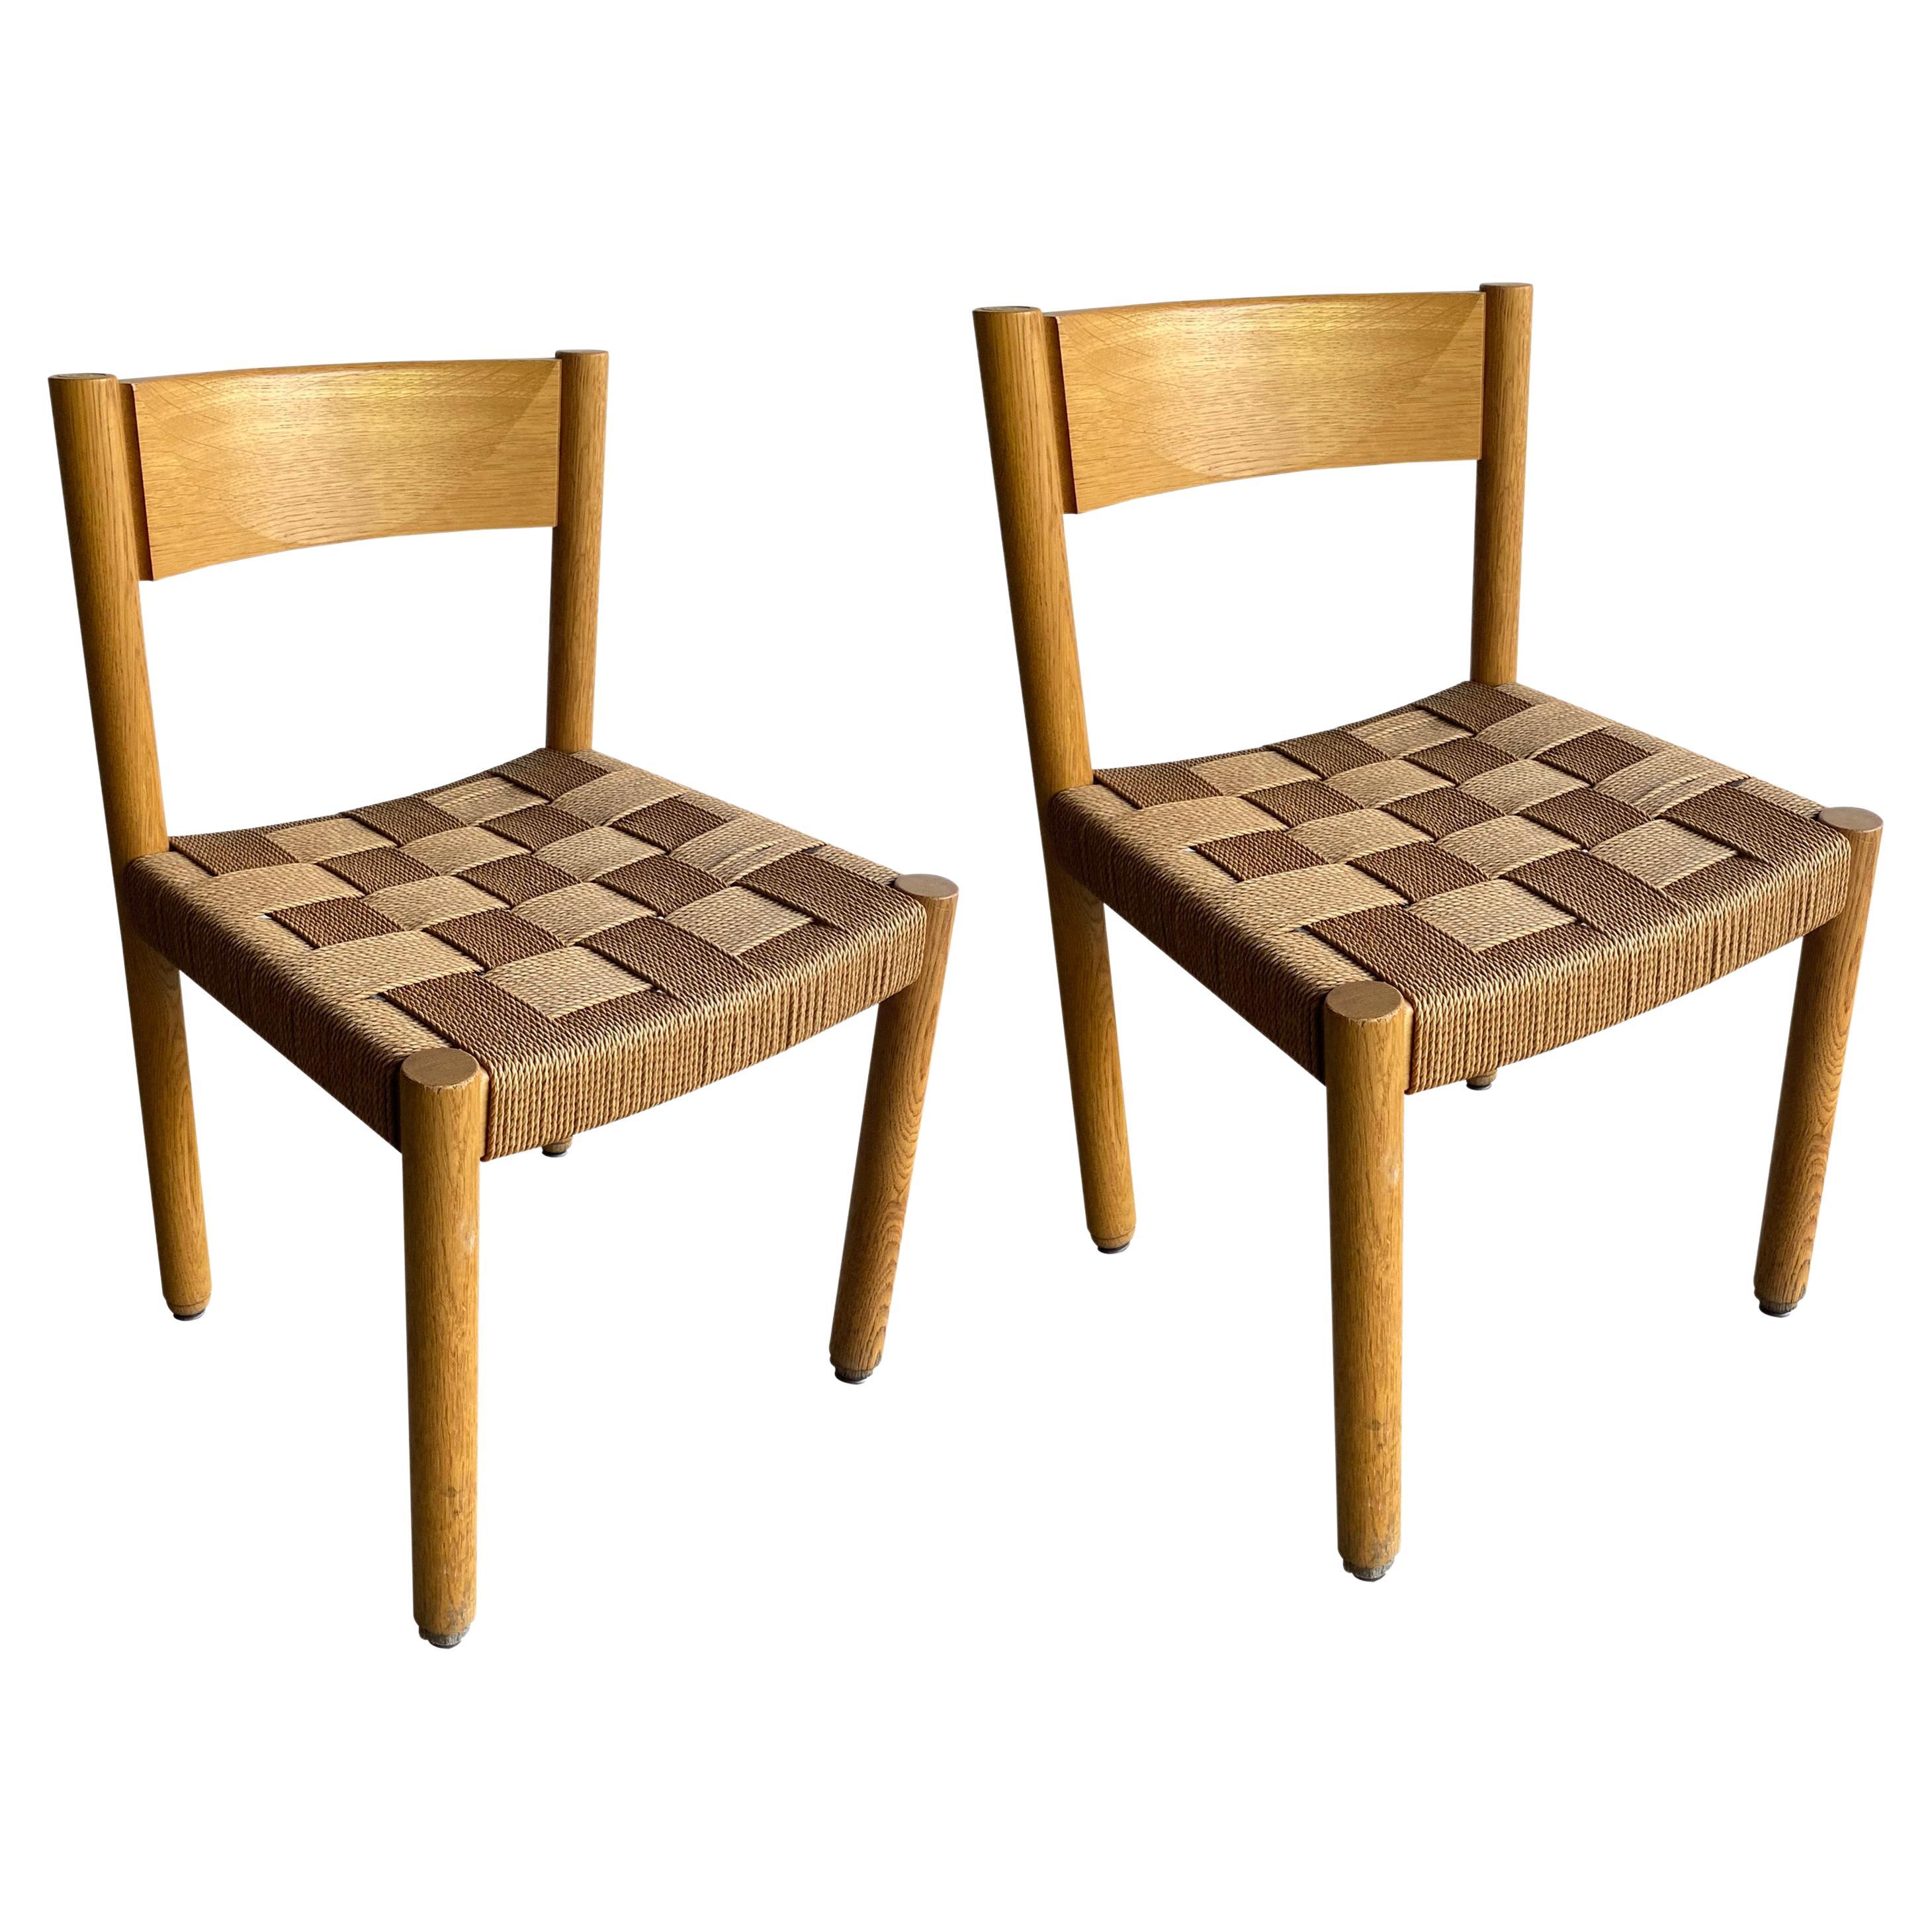 Up to 10 Available, Oak and Rush Dining Chairs by Haussmann, Switzerland, 1960's